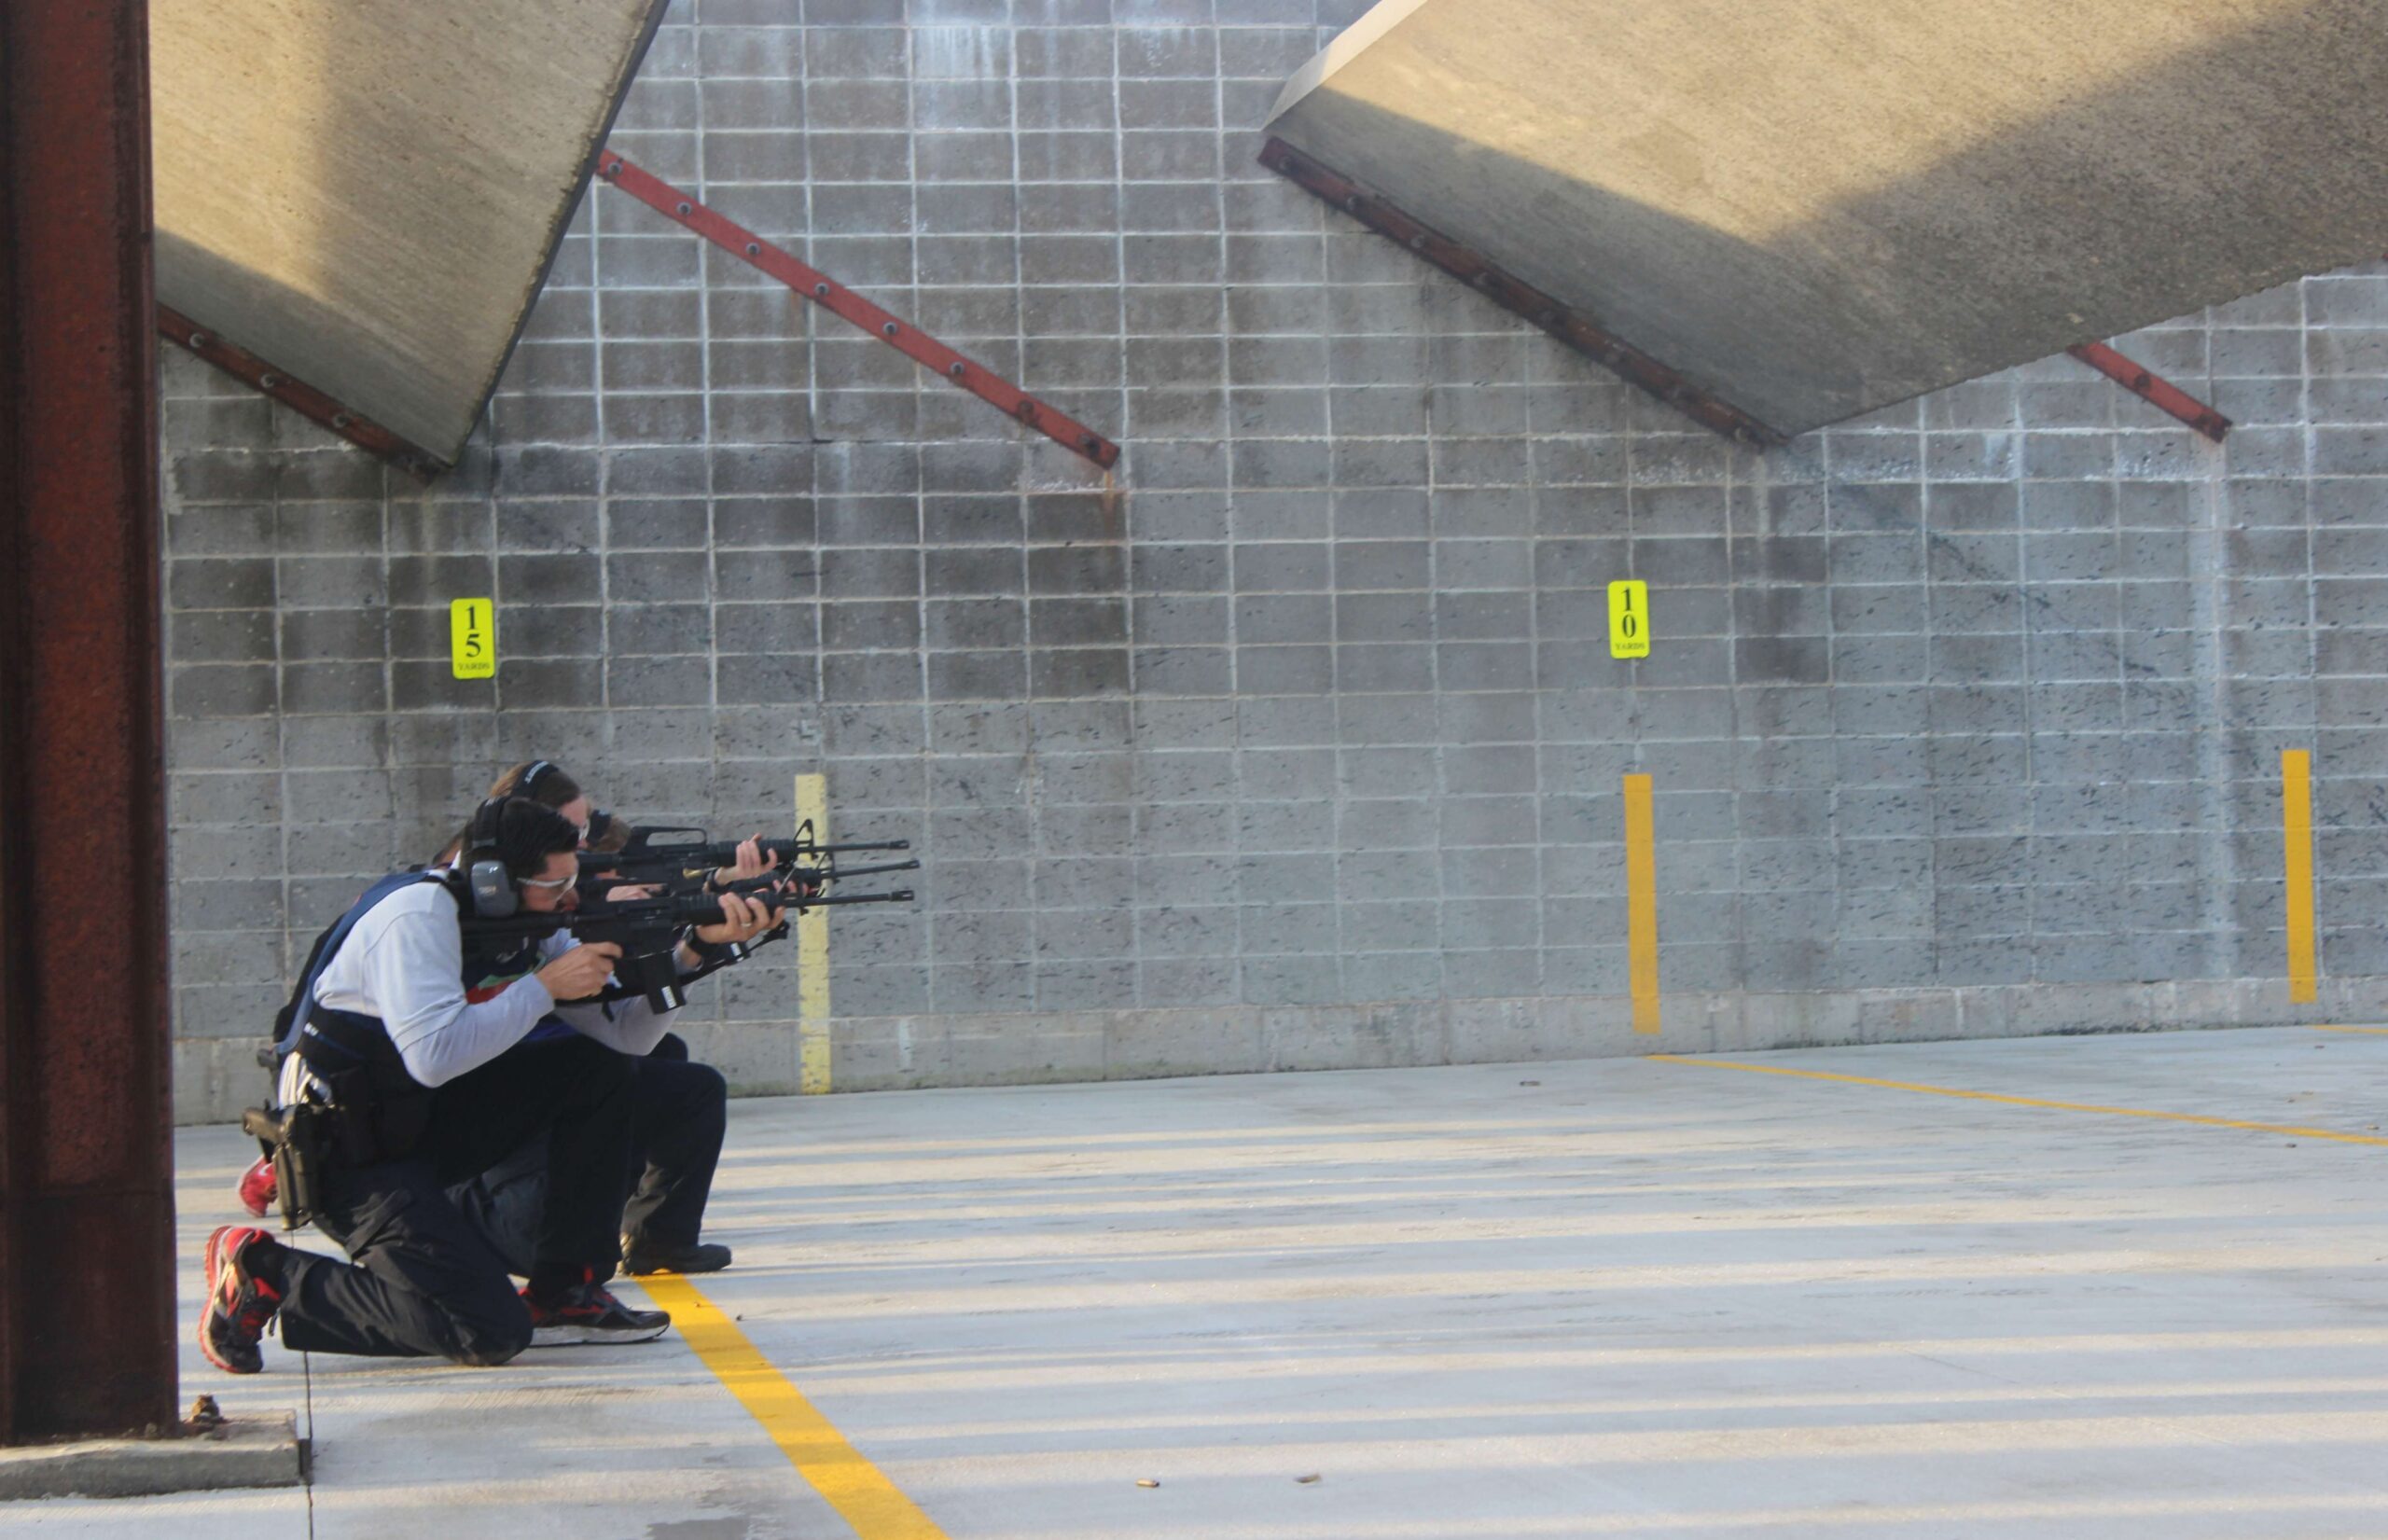 Madison Police recruits practice rifle shooting at the Dane County Law Enforcement Training Center shooting range.